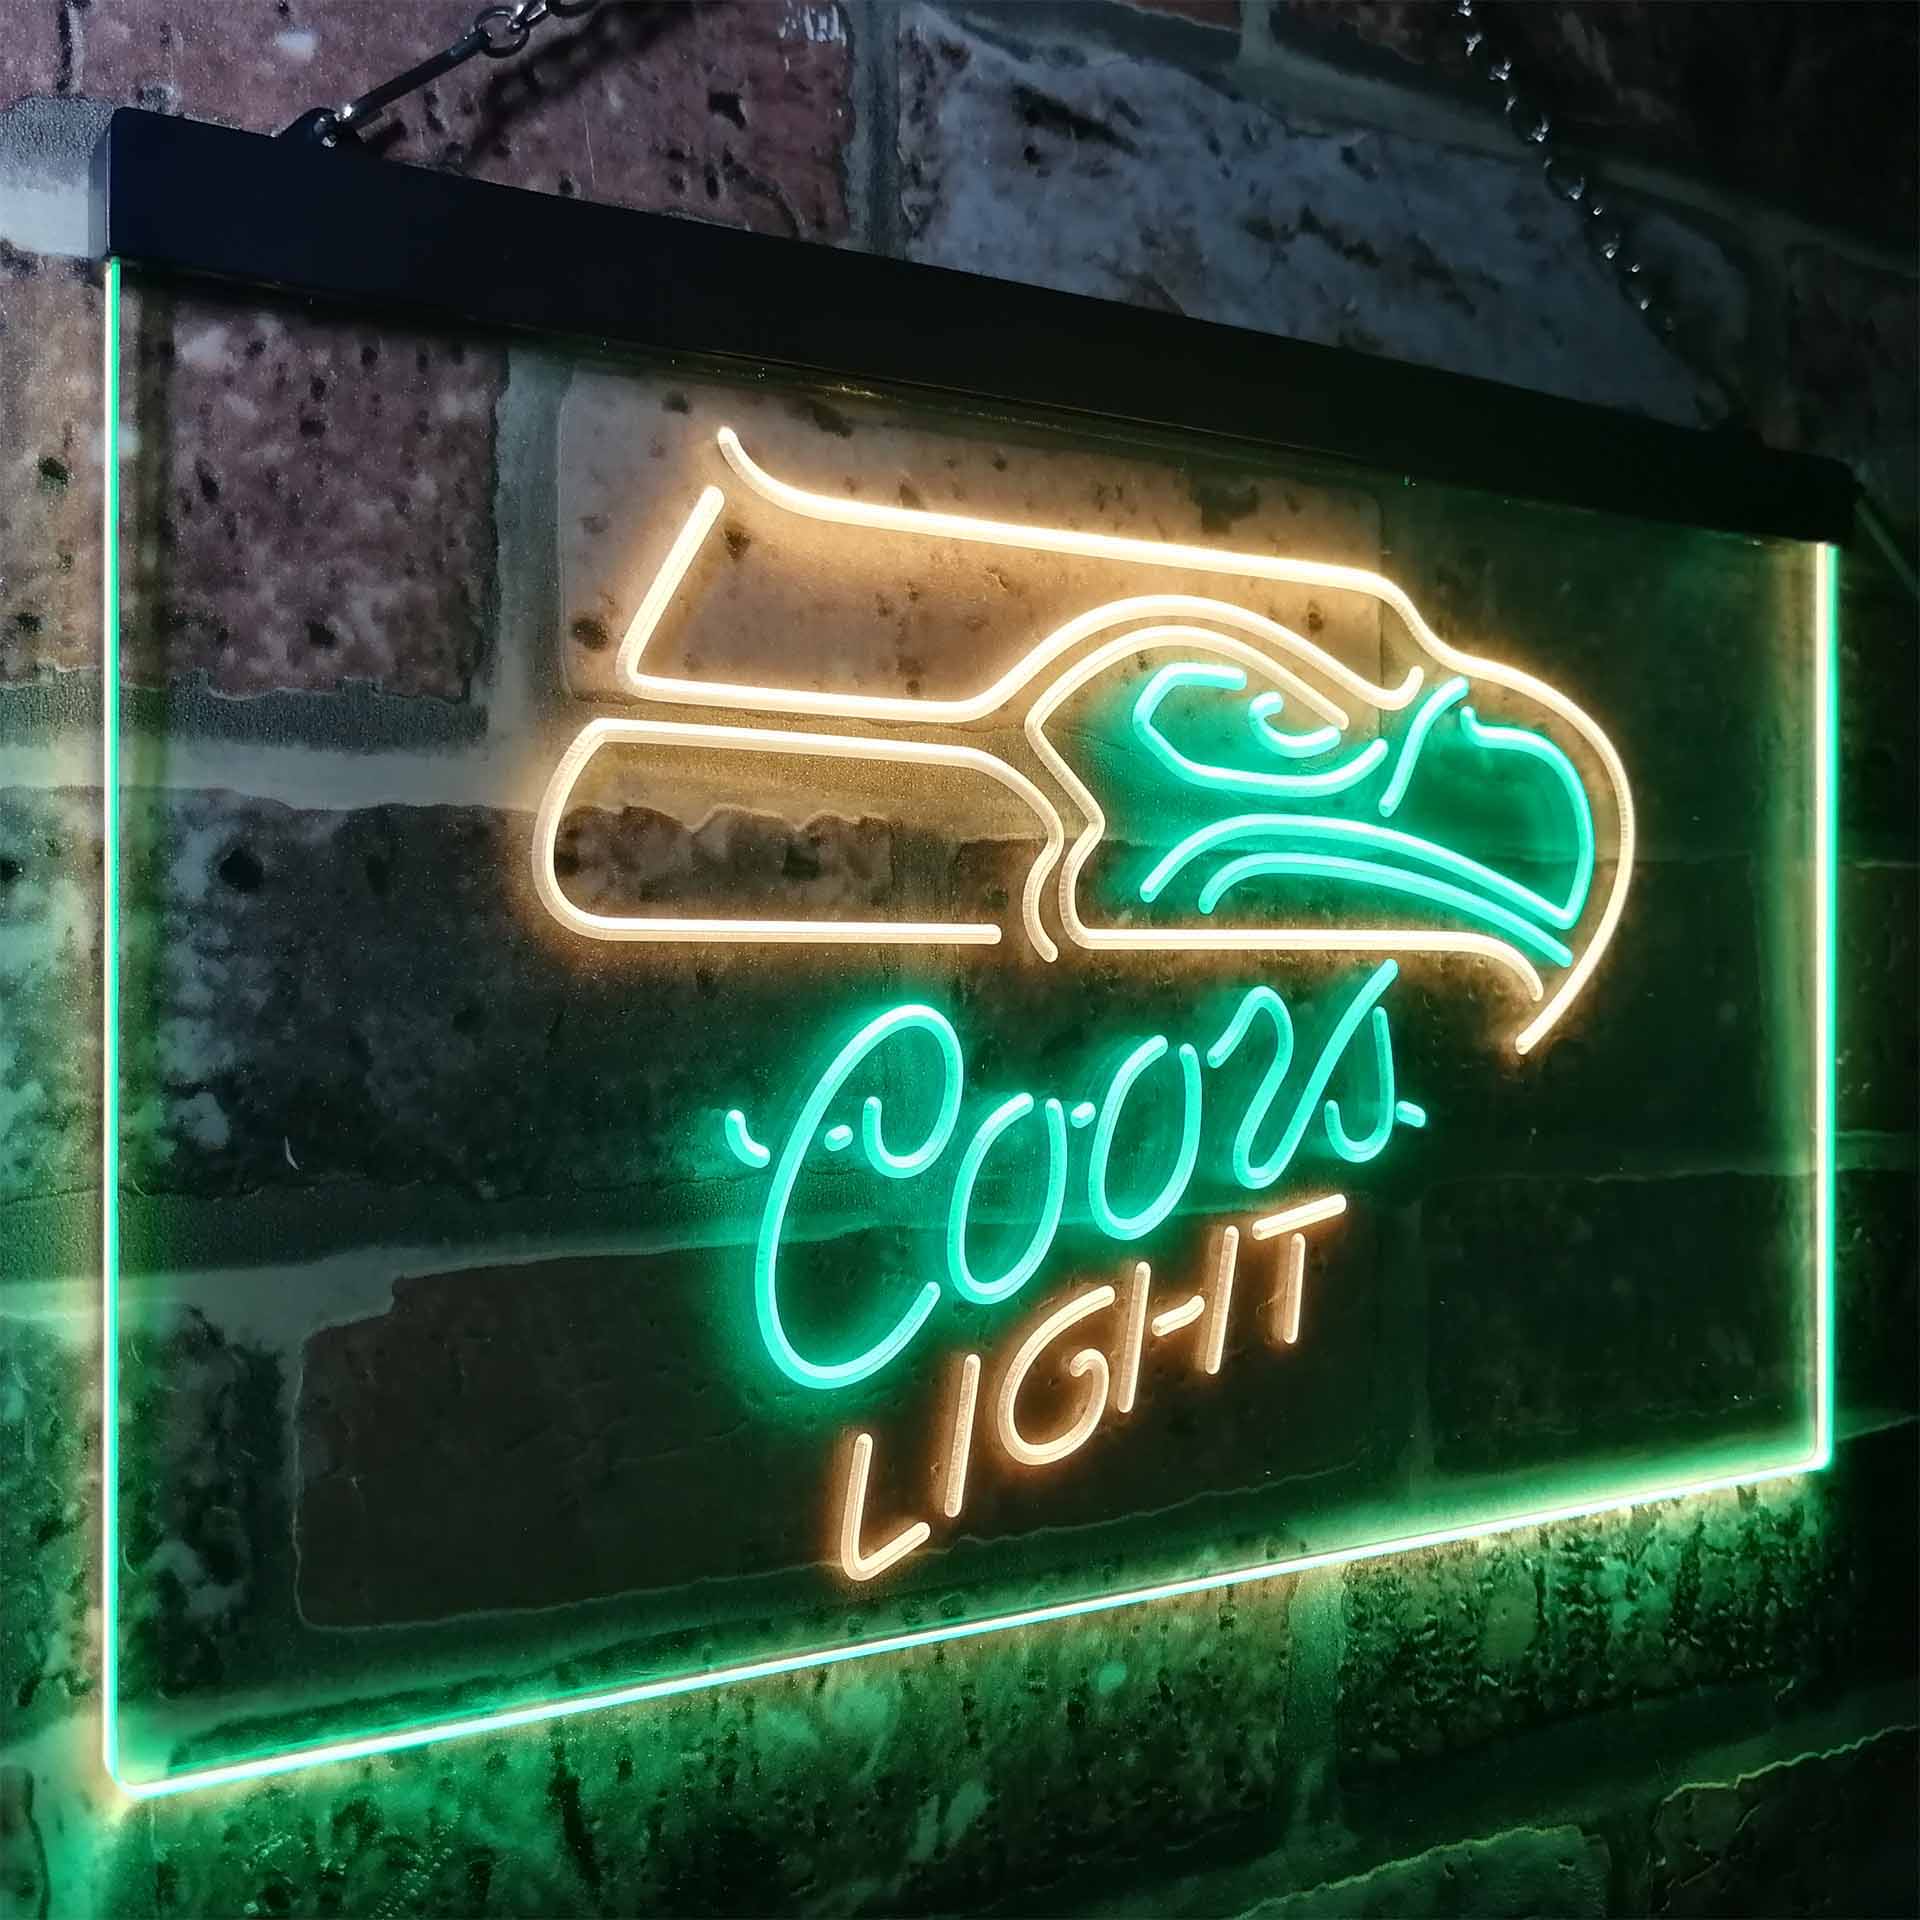 Seattle Seahawks Coors Light LED Neon Sign